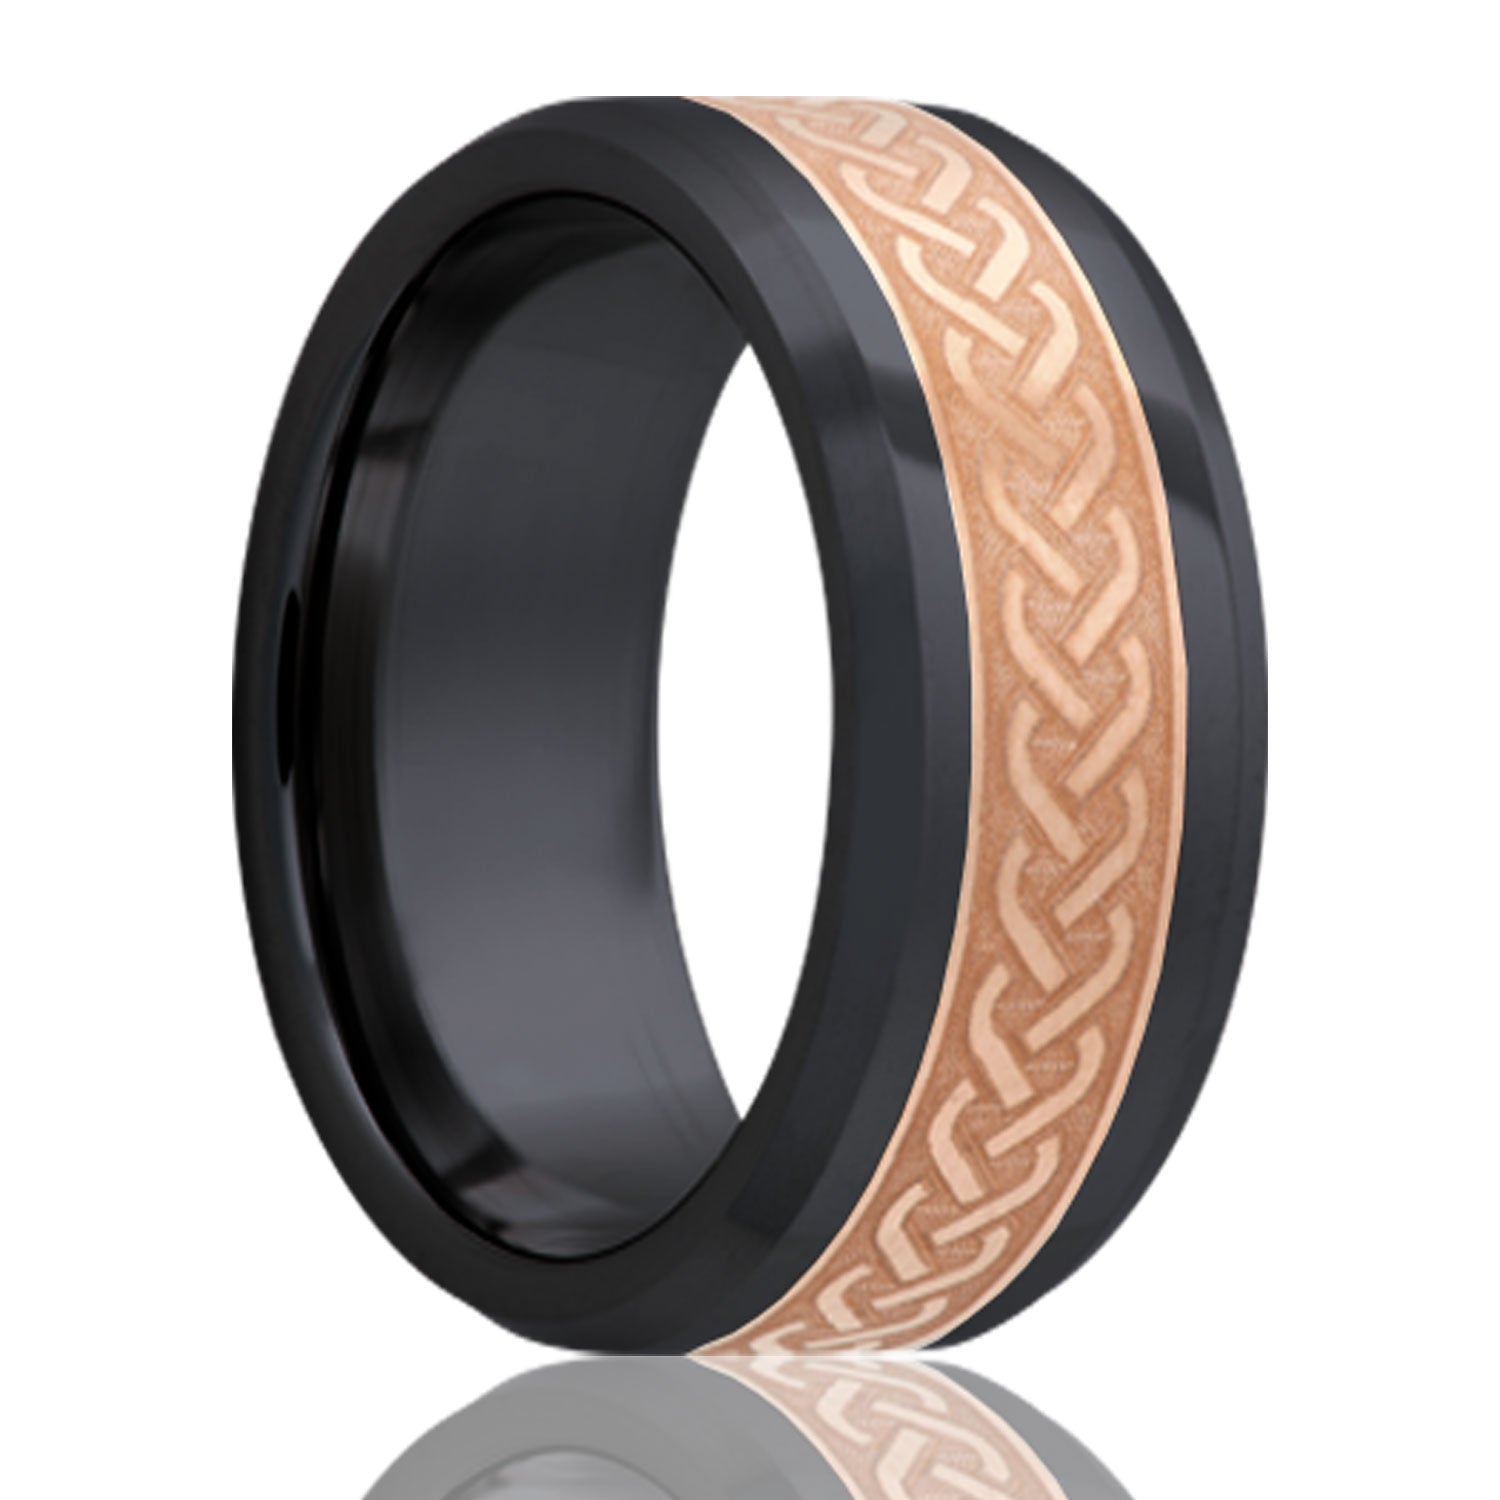 A celtic pattern copper inlay zirconium wedding band with beveled edges displayed on a neutral white background.